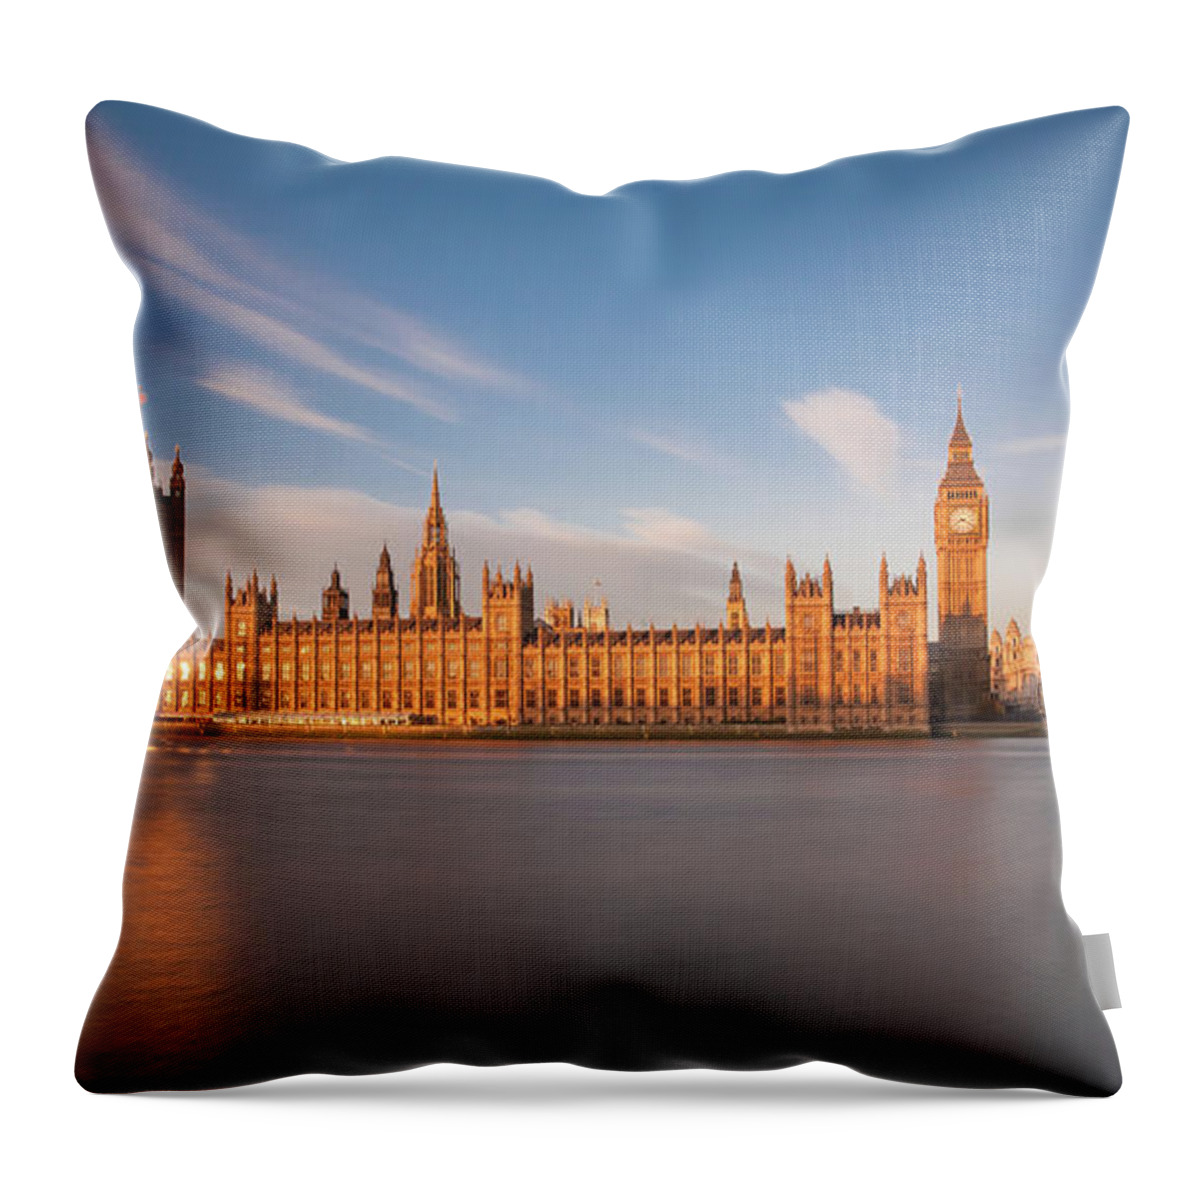 Arch Throw Pillow featuring the photograph Golden Palace Of Westminster by Tu Xa Ha Noi